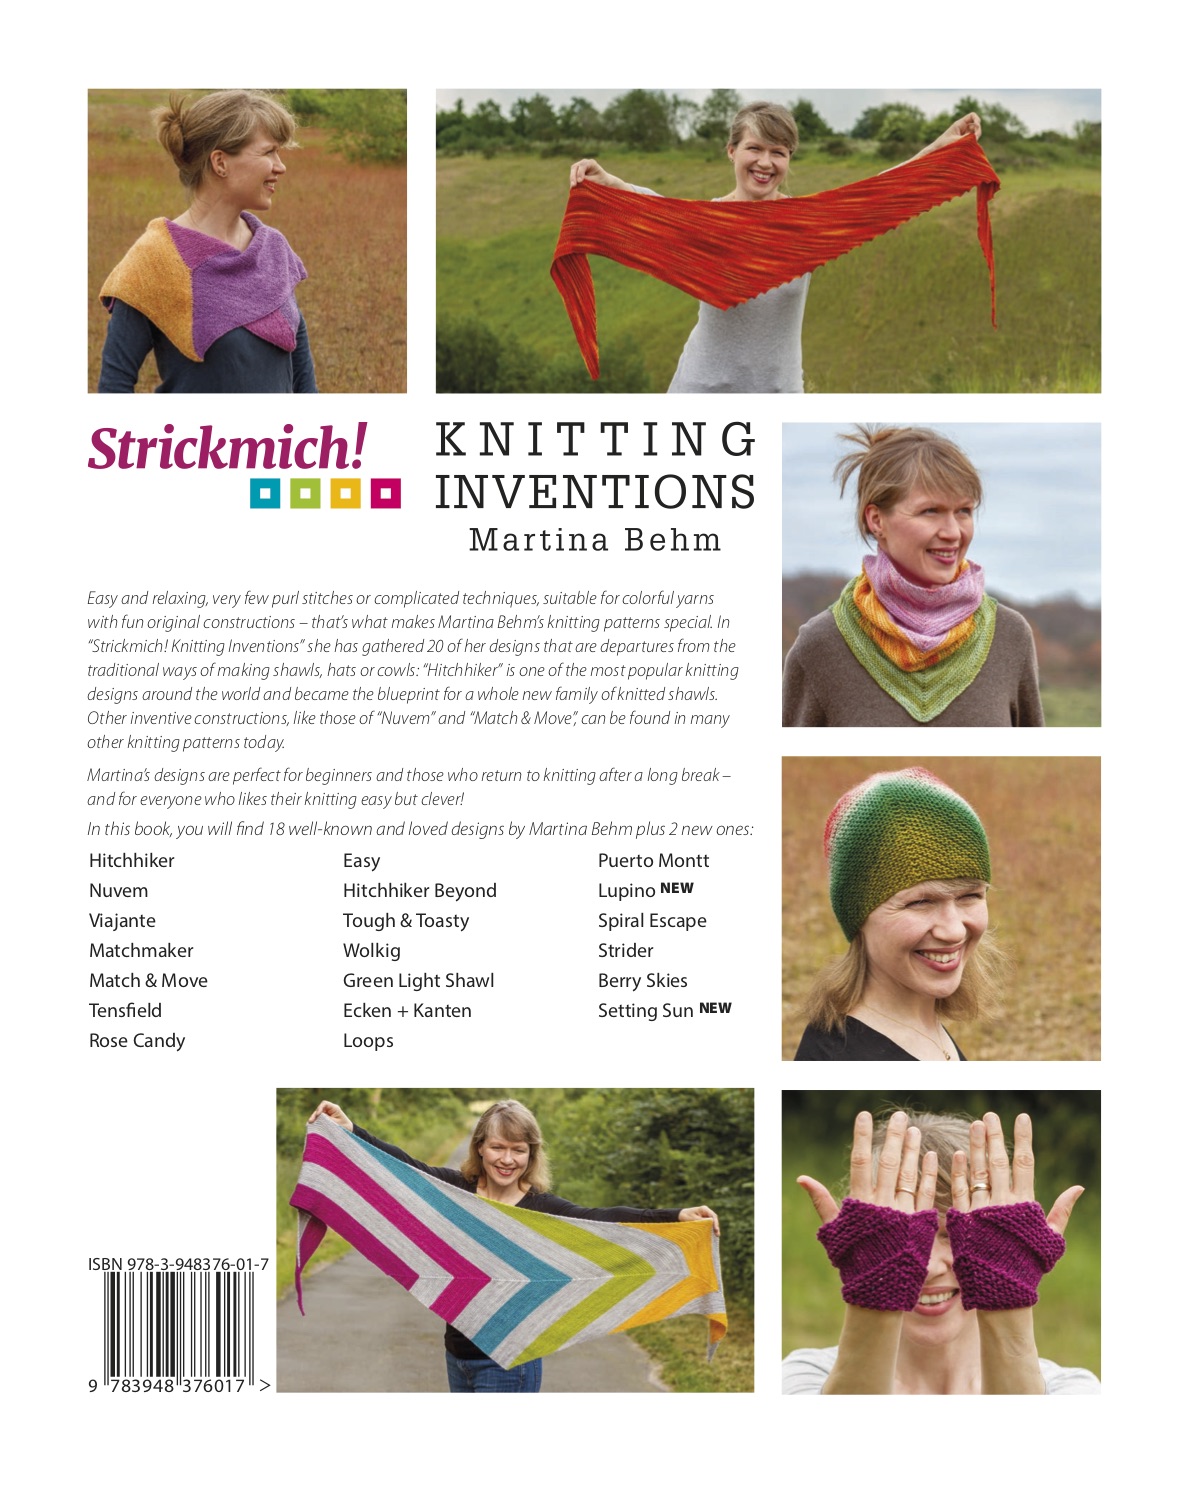 Strickmich Knitting Inventions back Cover